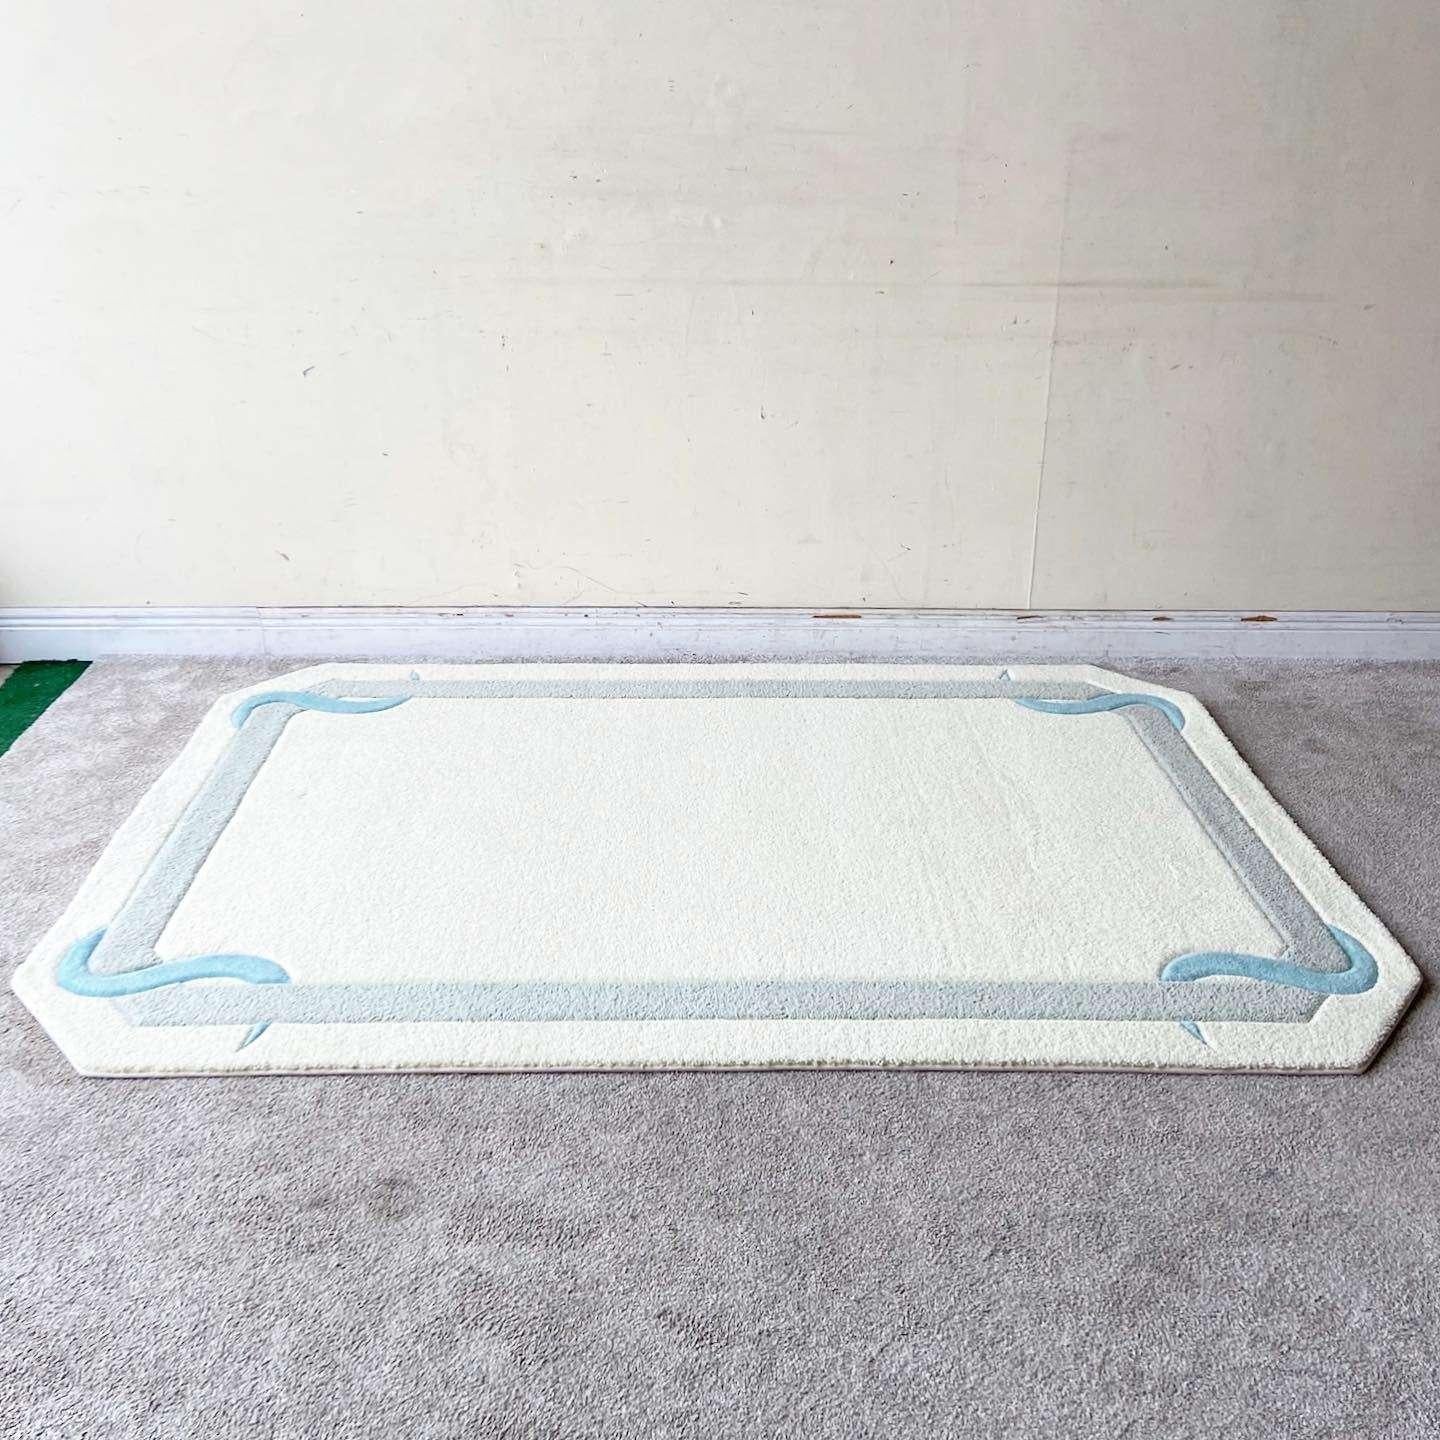 Outstanding vintage postmodern sculpted area rug. Features an off white center and edge with a gray border cornered by a serpentine aqua blue ribbon.

Rug 3
